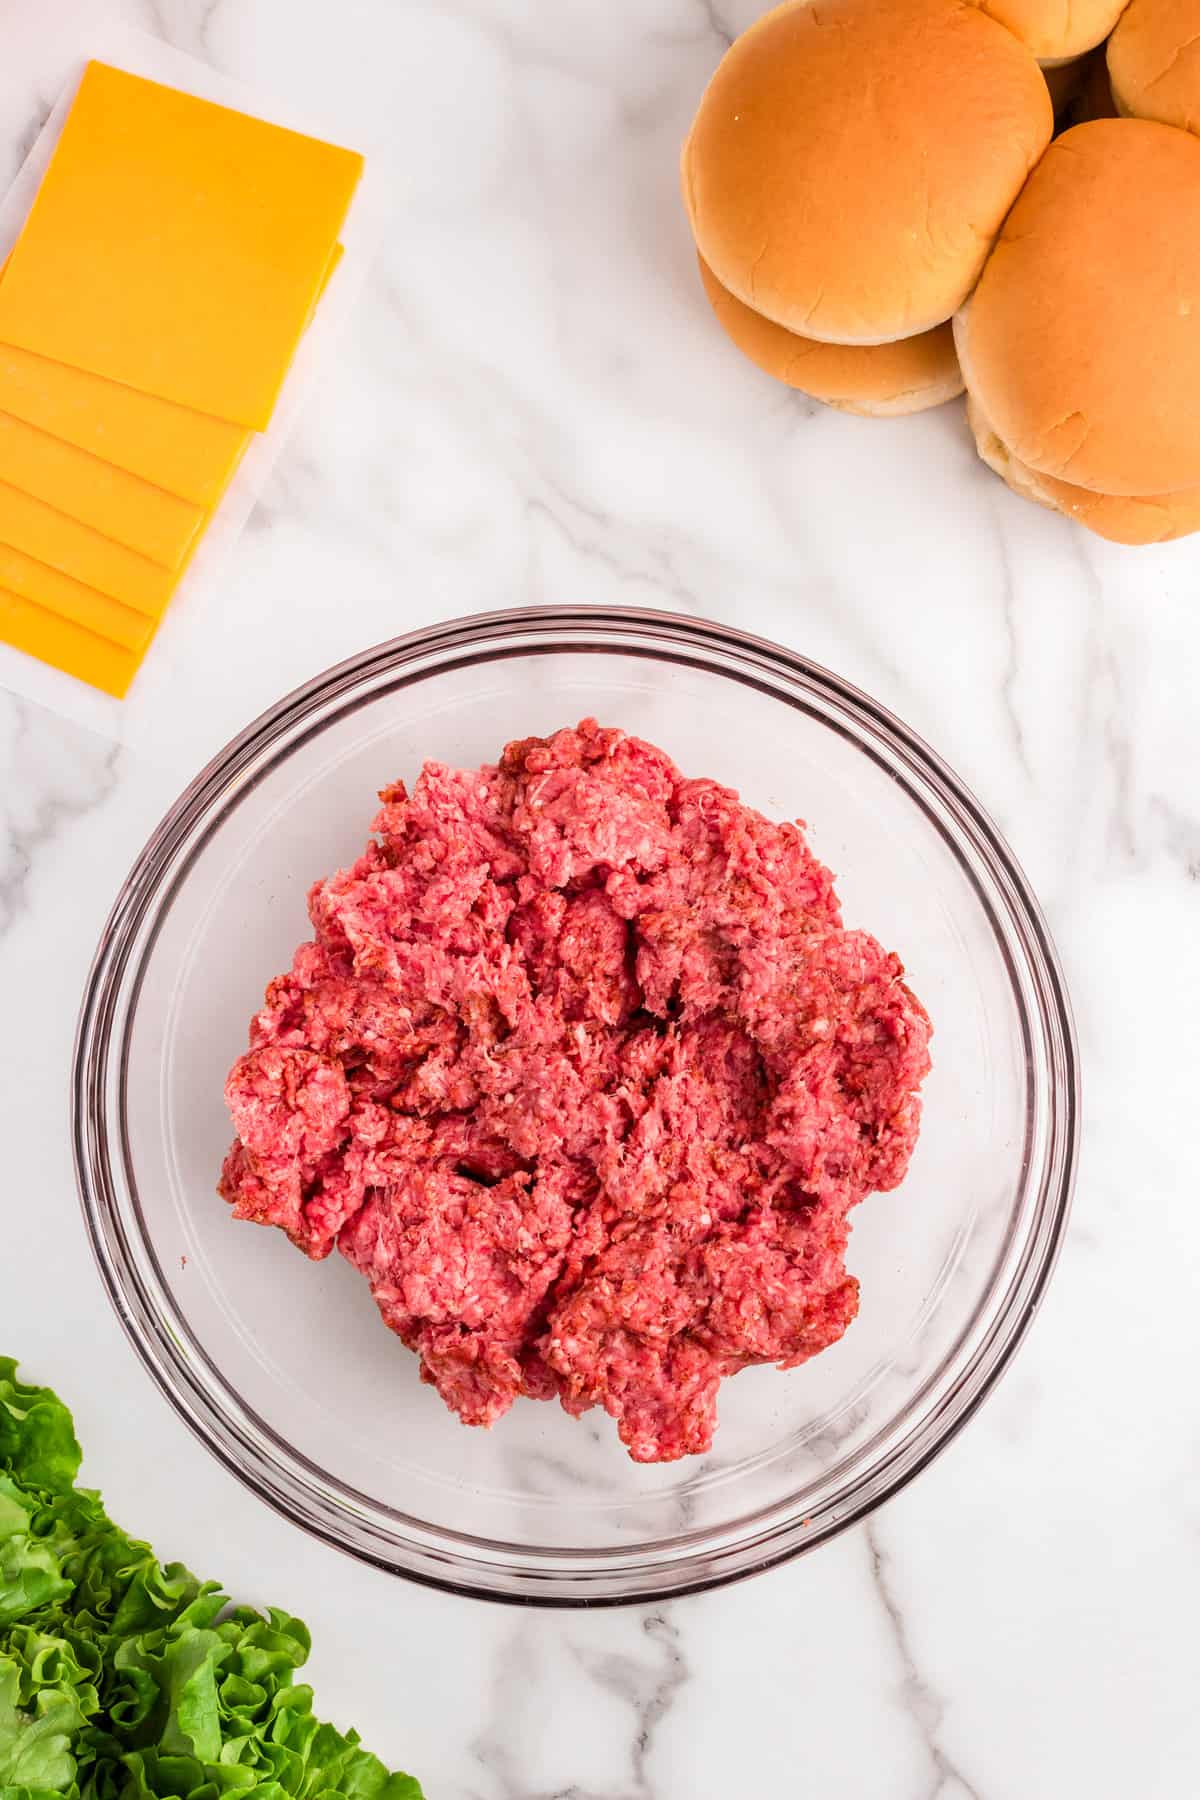 Ground beef in mixing bowl for Baked Hamburgers recipe